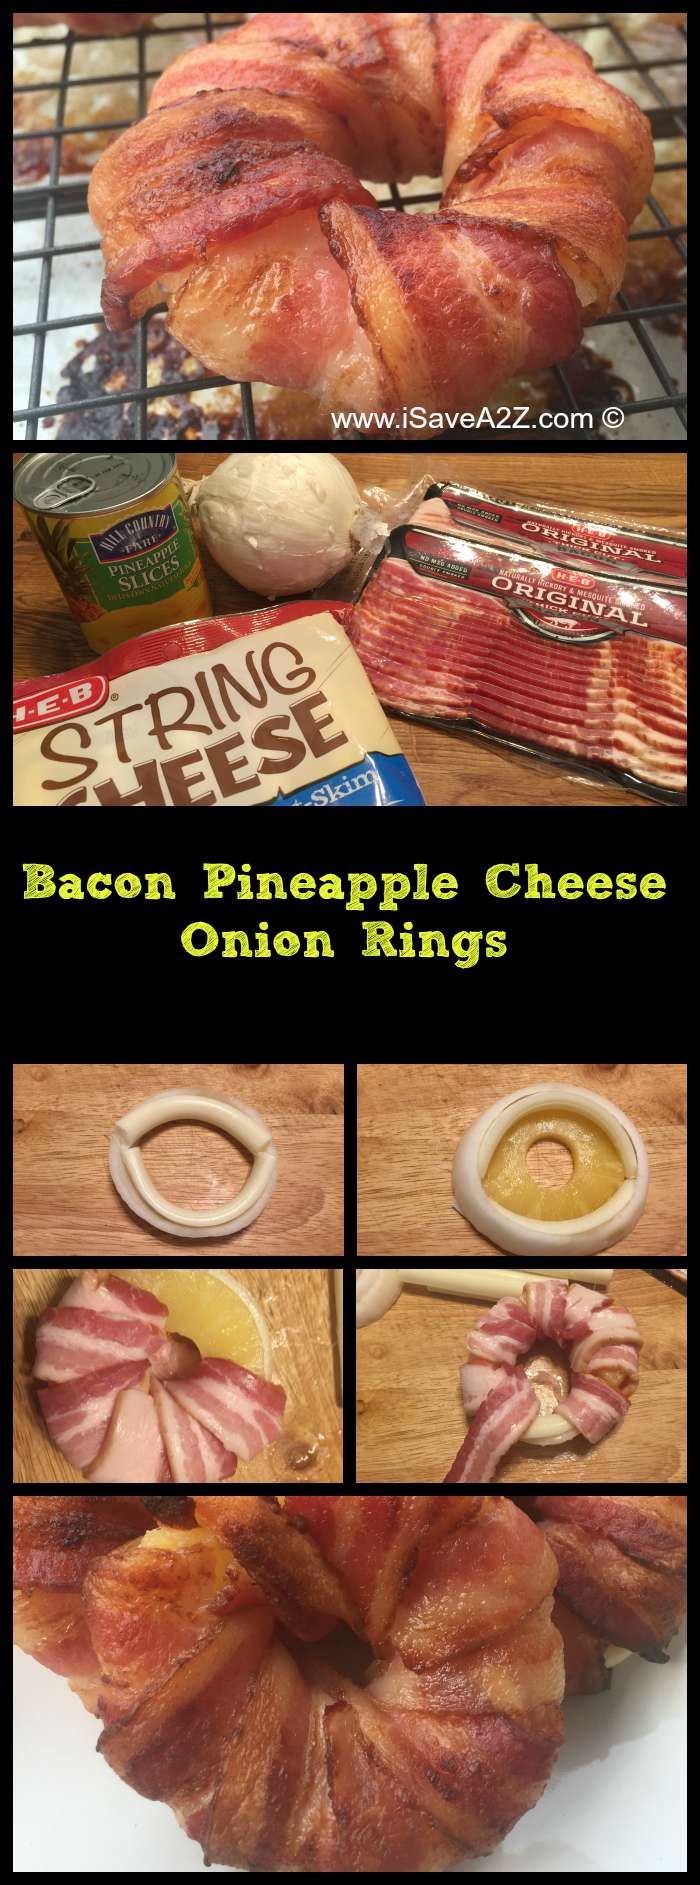 Bacon Pineapple Cheese Onion Rings Recipe